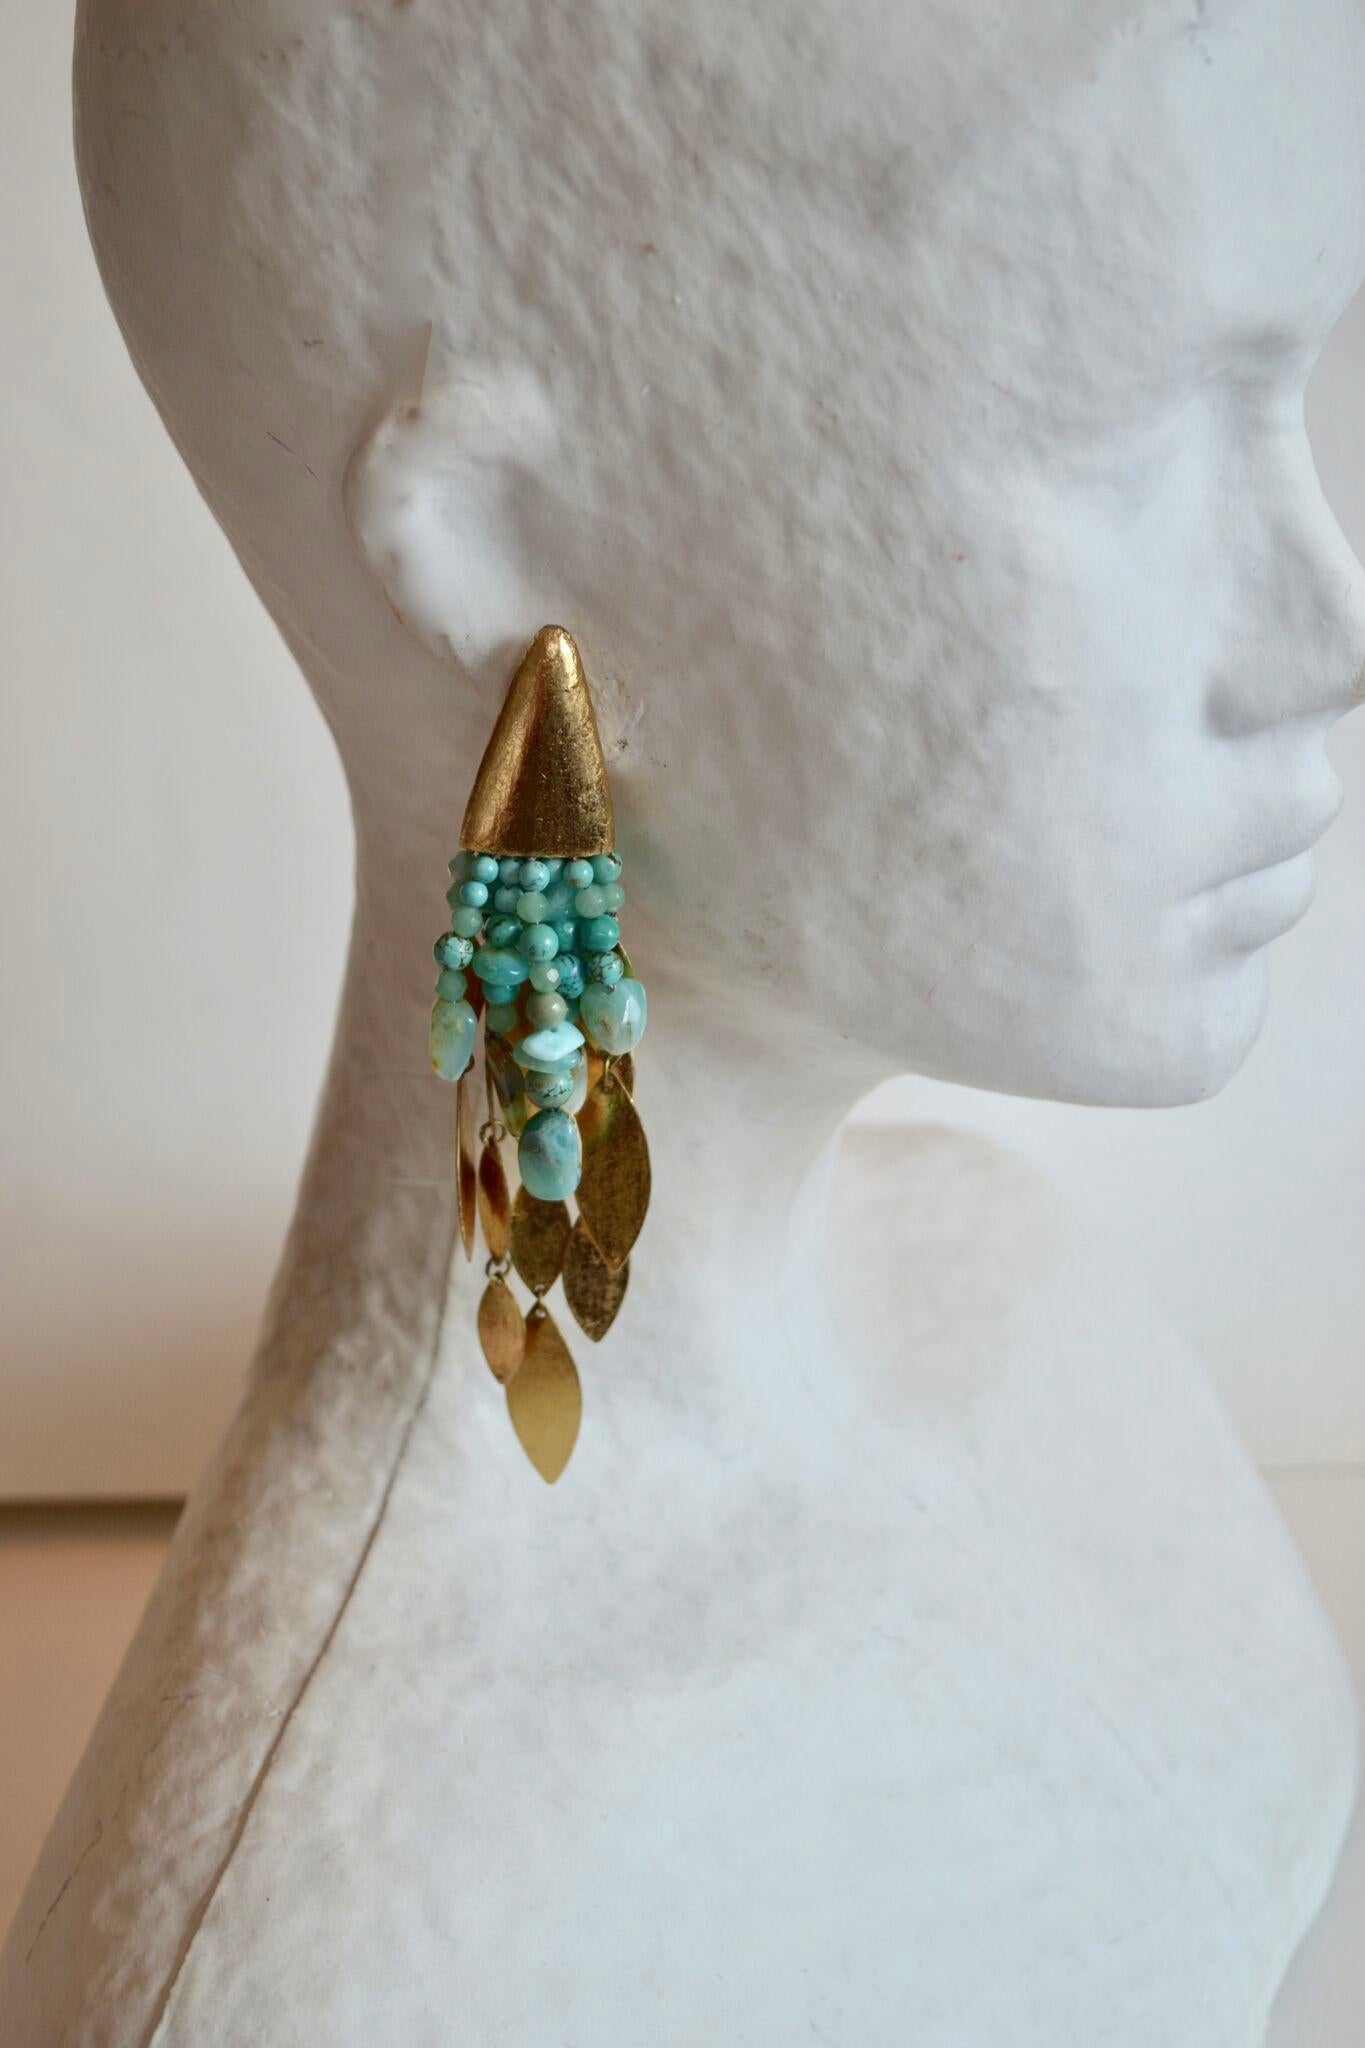 Monies One of a Kind Turquoise, Opal, and Gold Plate Drop Clips.

5